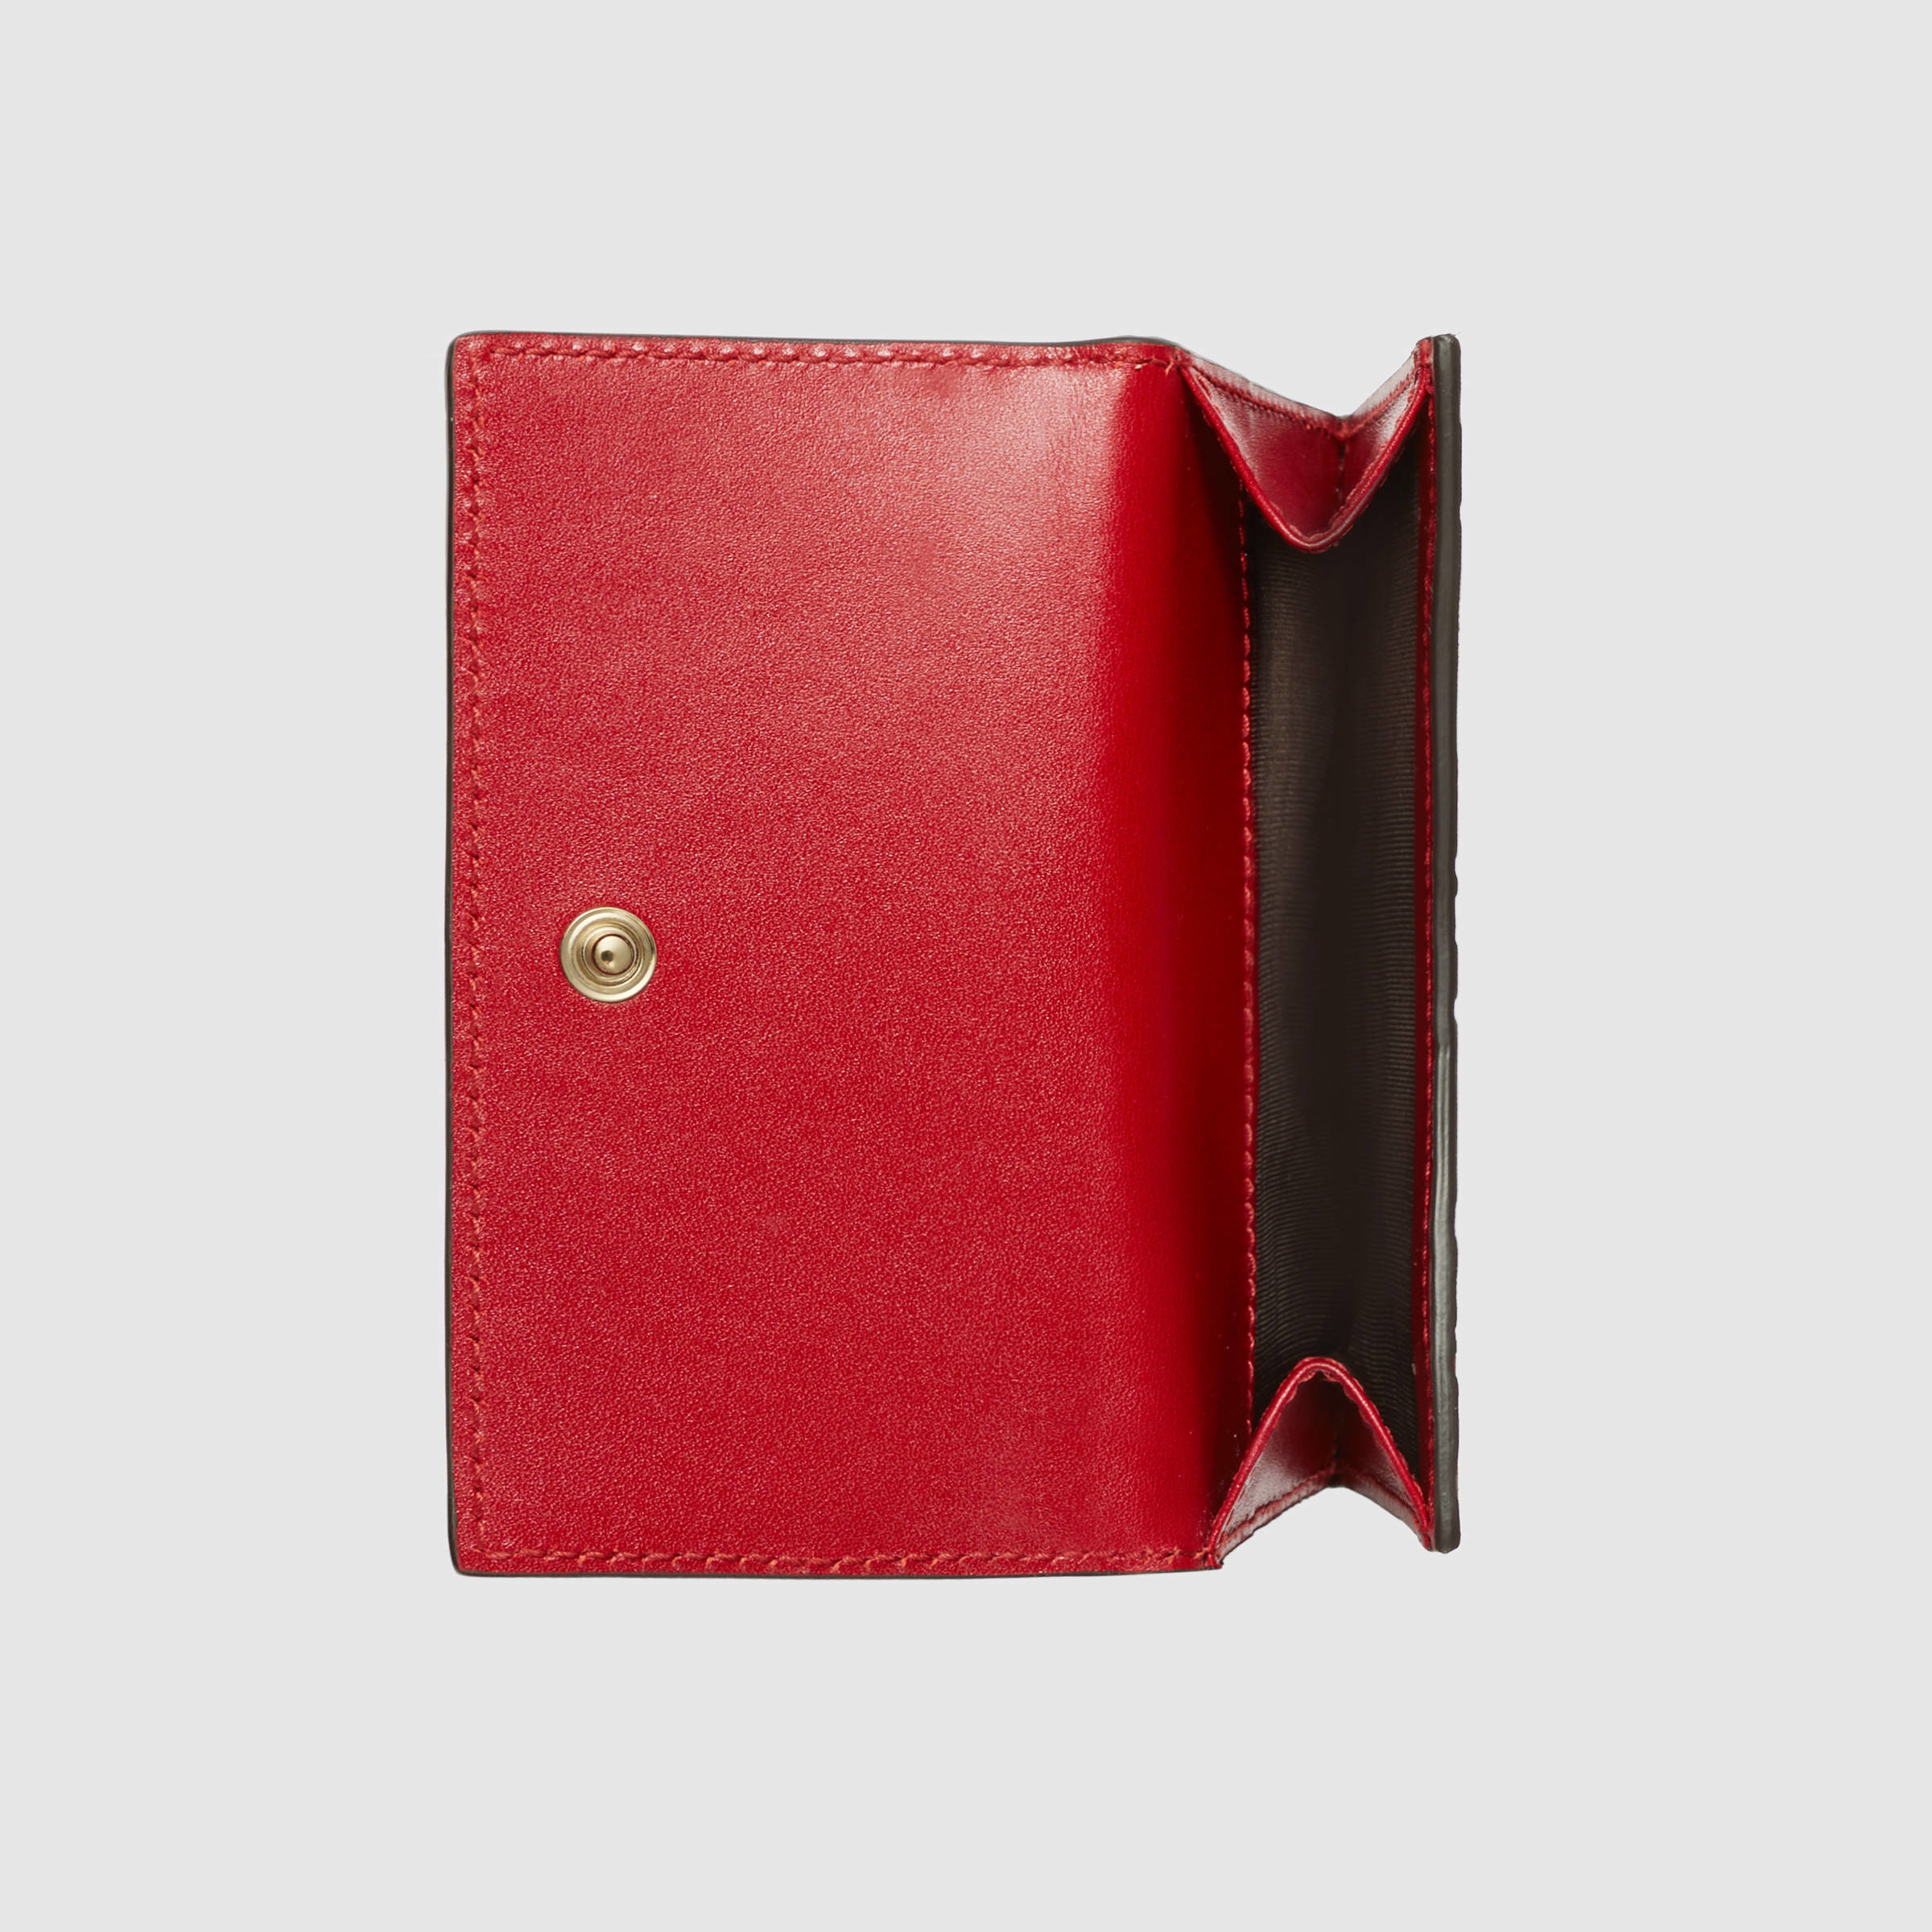 Lyst - Gucci Bow Signature Wallet in Red